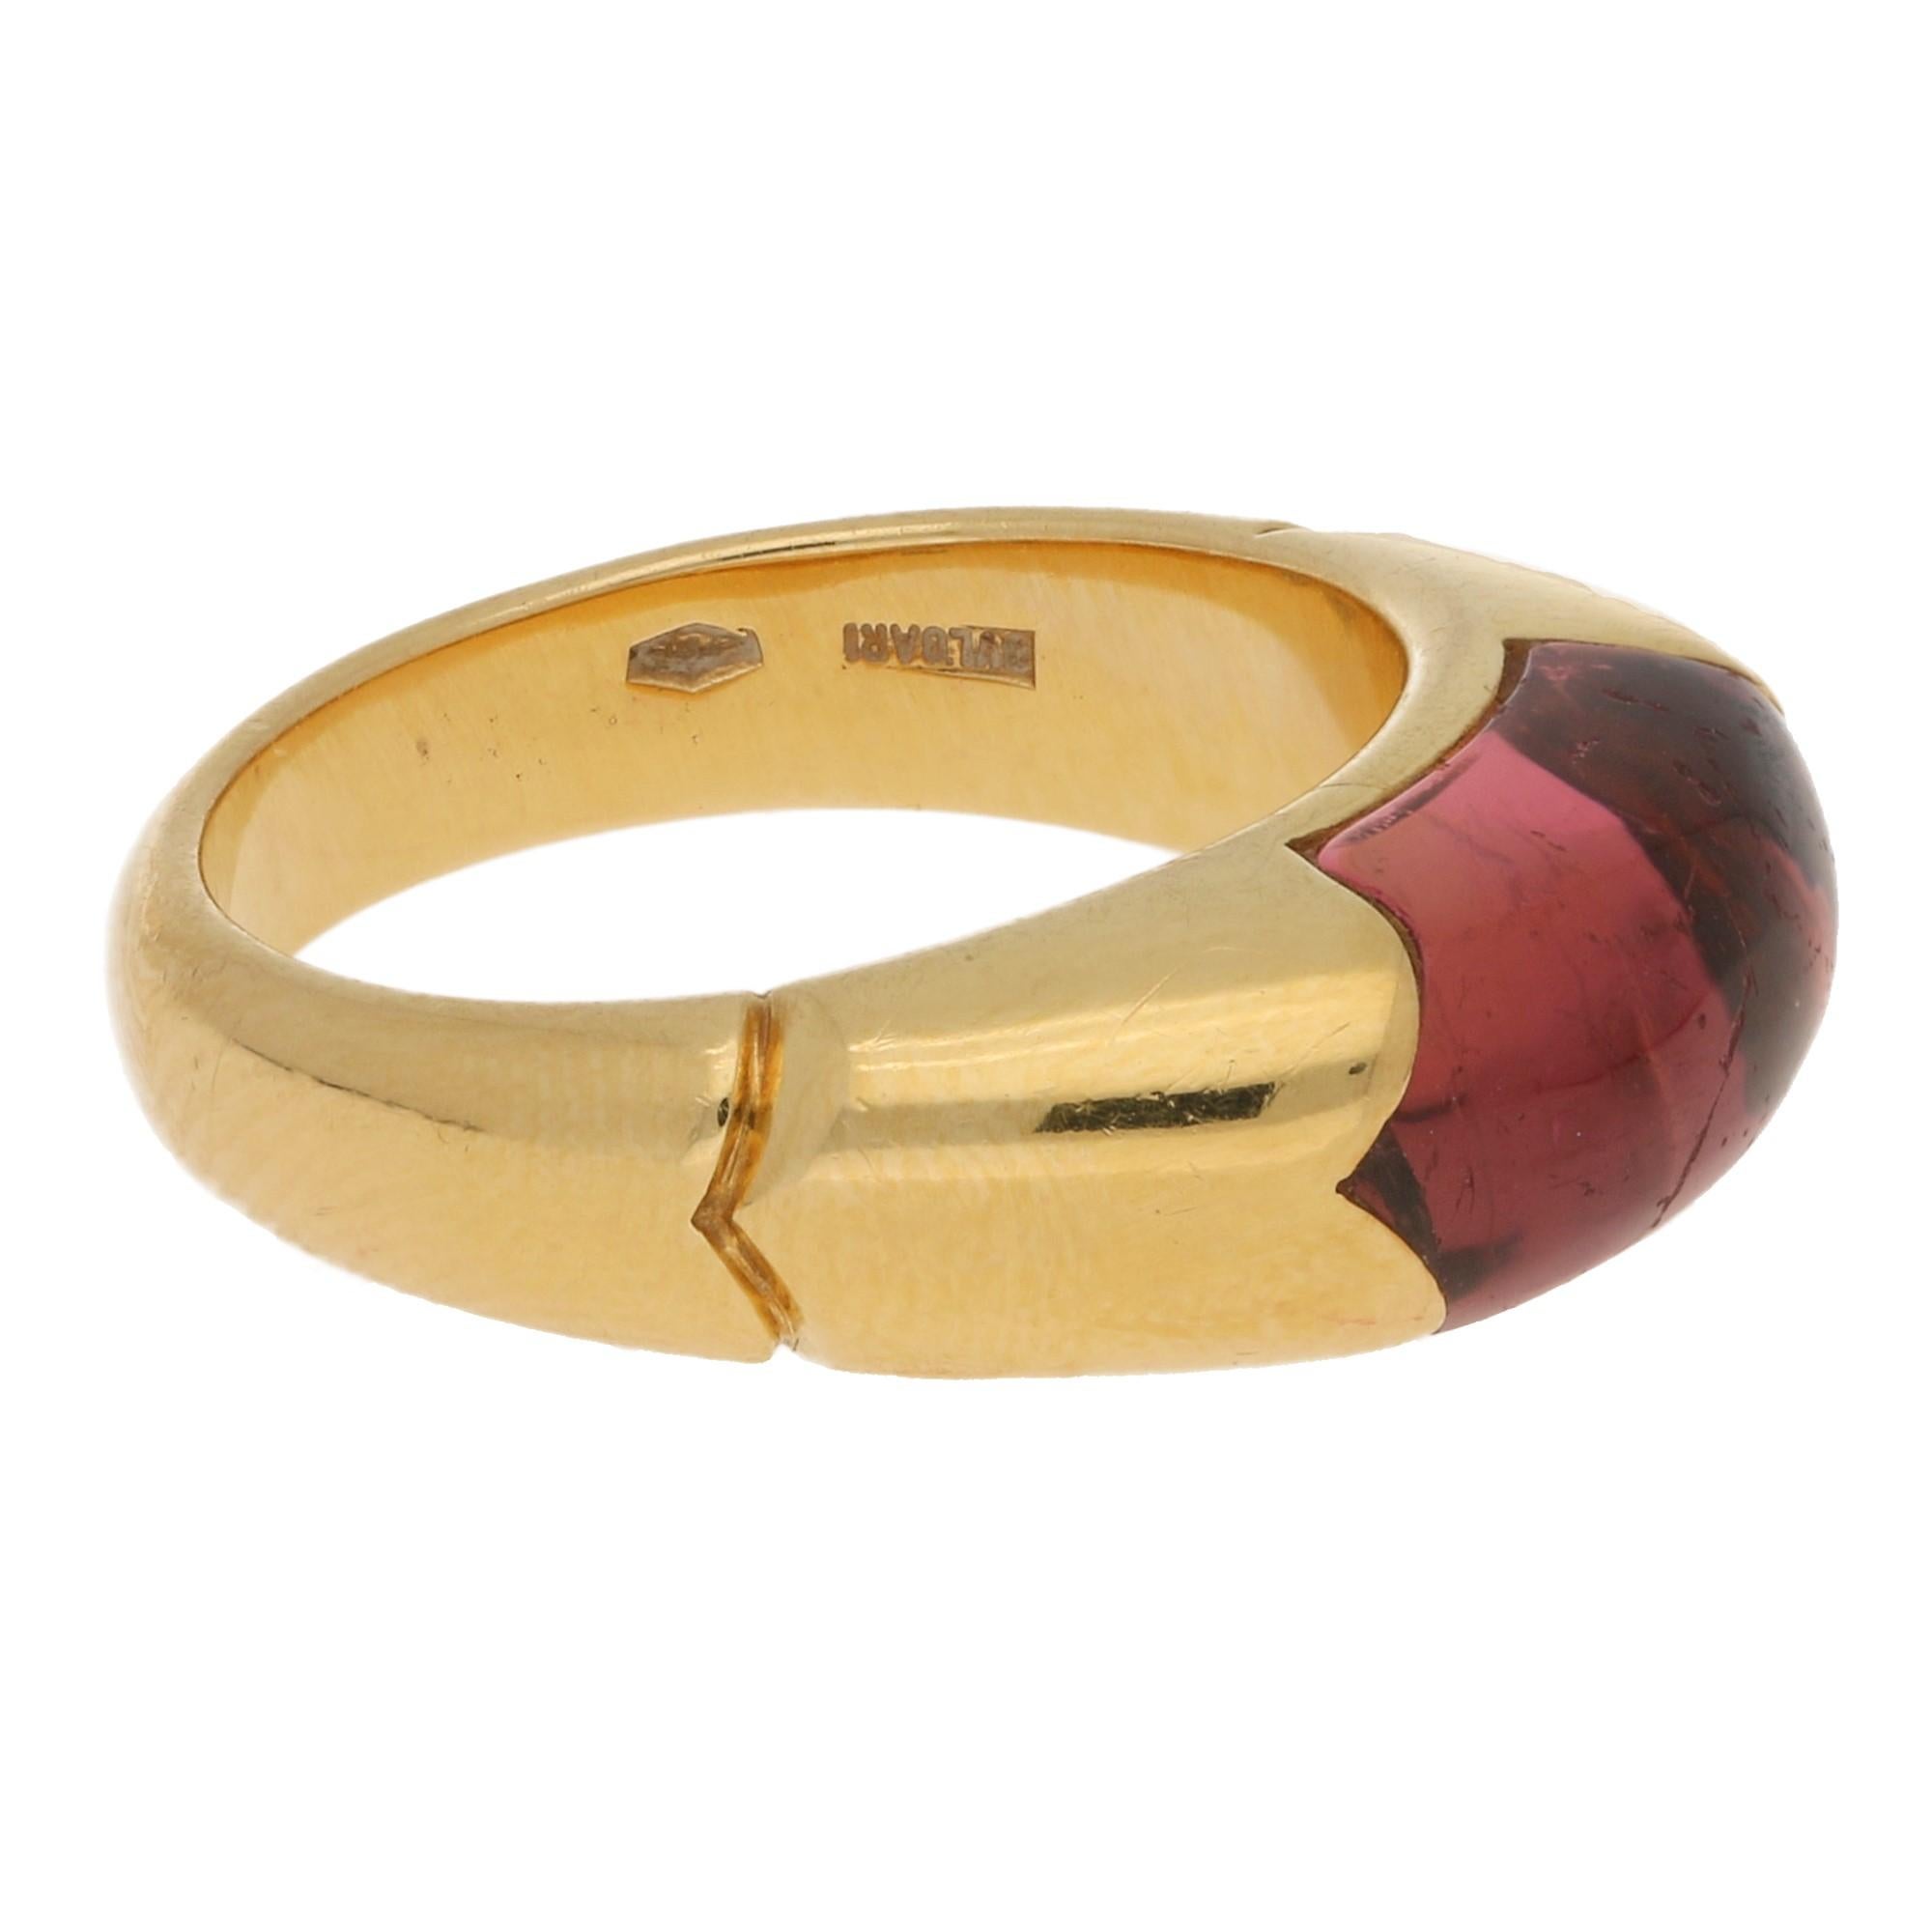 This is a classic original Bvlgari 'Tronchetto' ring featuring a cabochon cut tourmaline beautifully mounted in 18k yellow gold with the well known Bvlagri detailing to each side of the band. 

Finger size UK, K 1/2 , US 5.5 to 6.